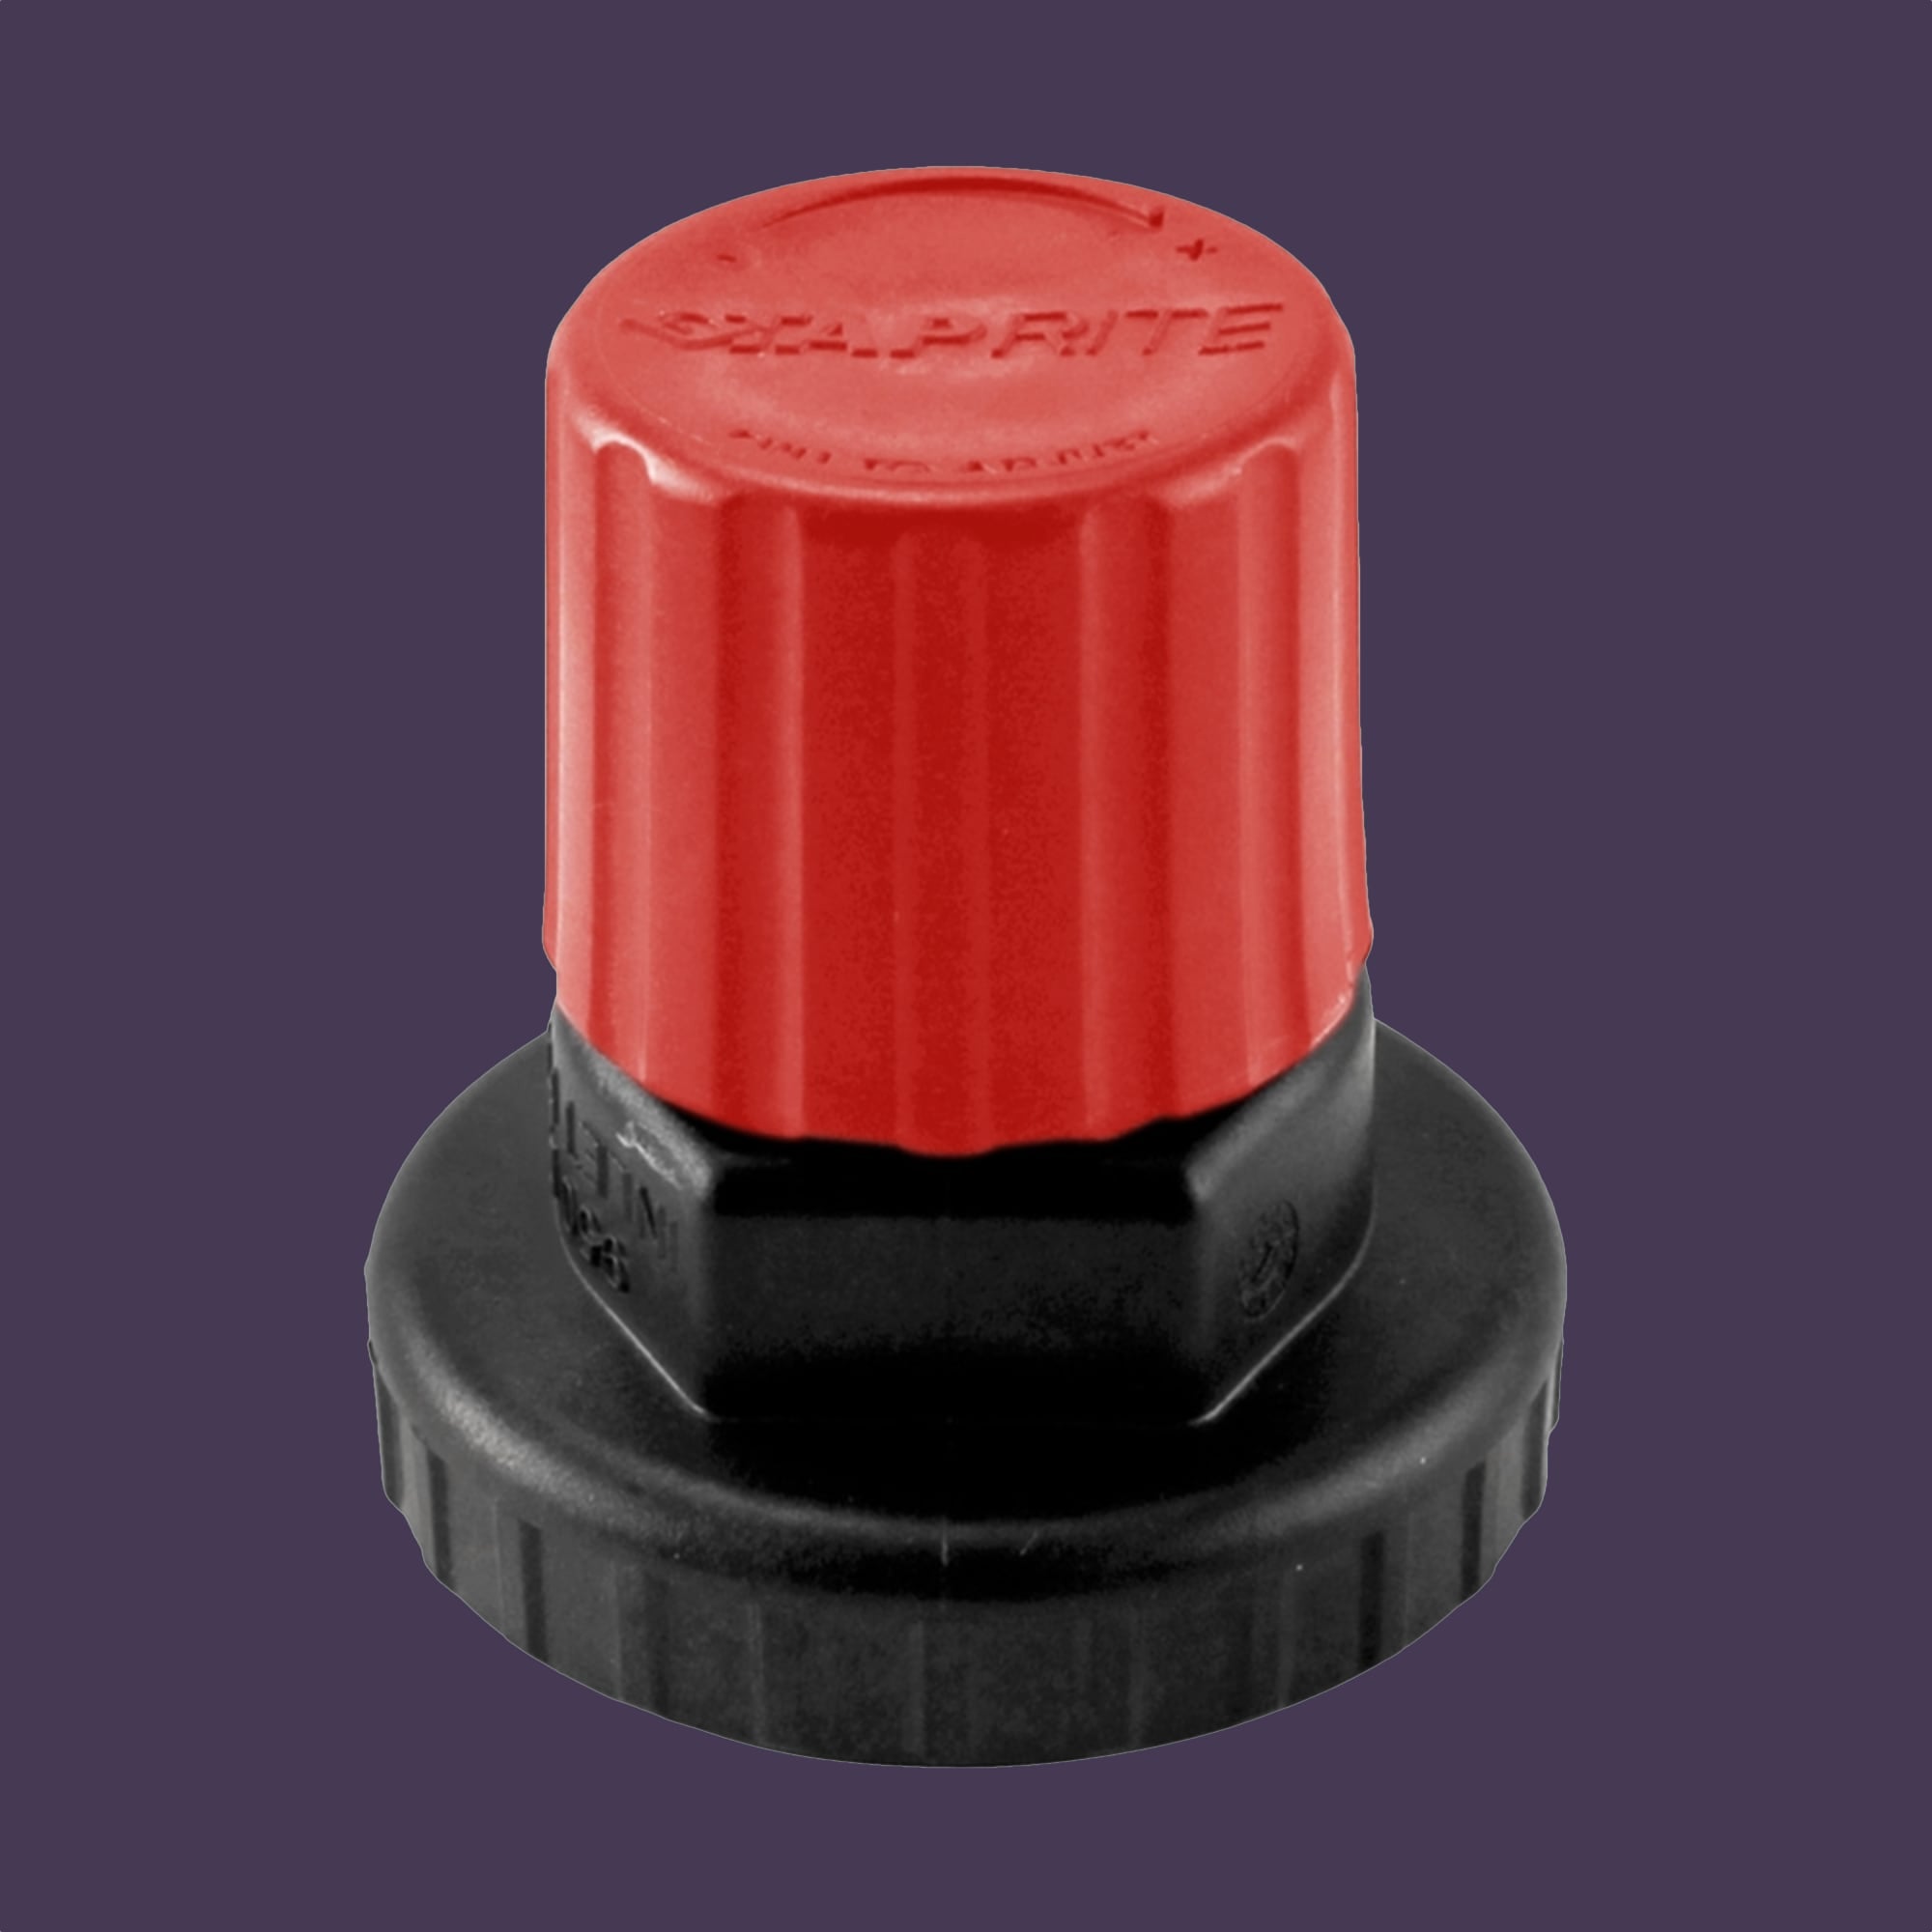 Taprite Replacement Knob - Red